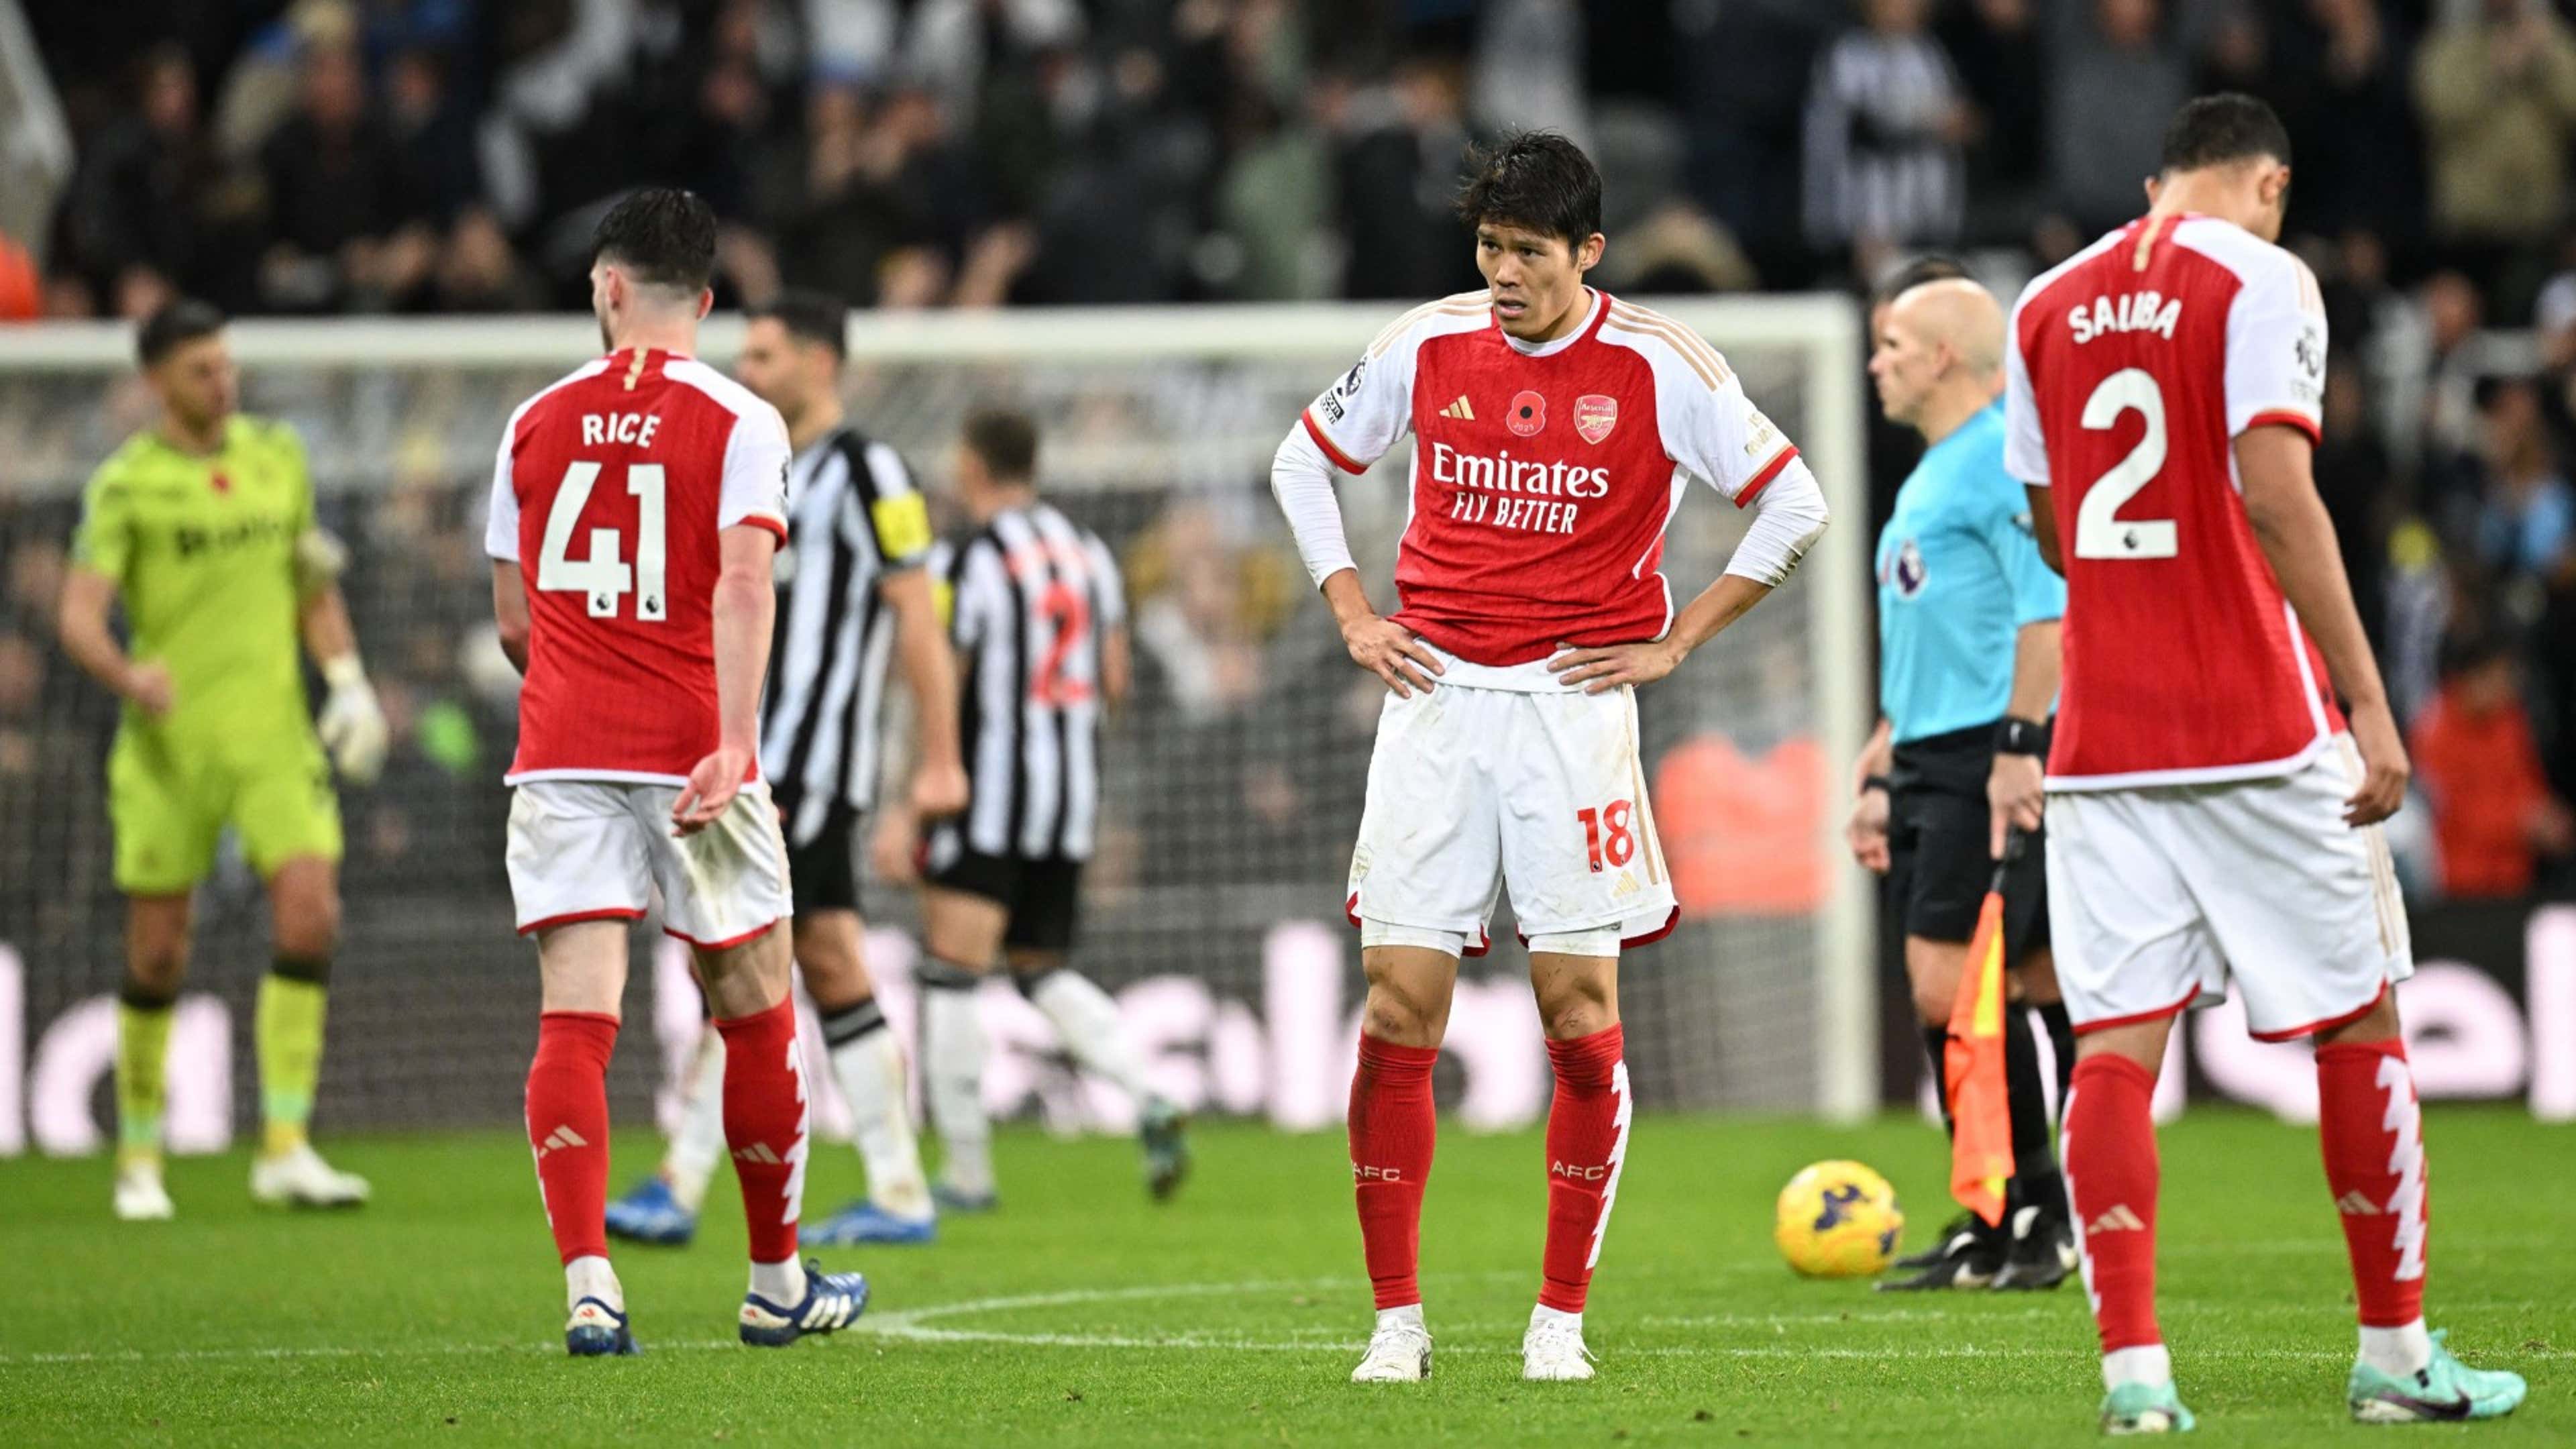 Moaning Mikel Arteta's VAR rant shouldn't overshadow Arsenal's shortcomings  - Gunners aren't strong enough to truly challenge Man City | Goal.com  Australia